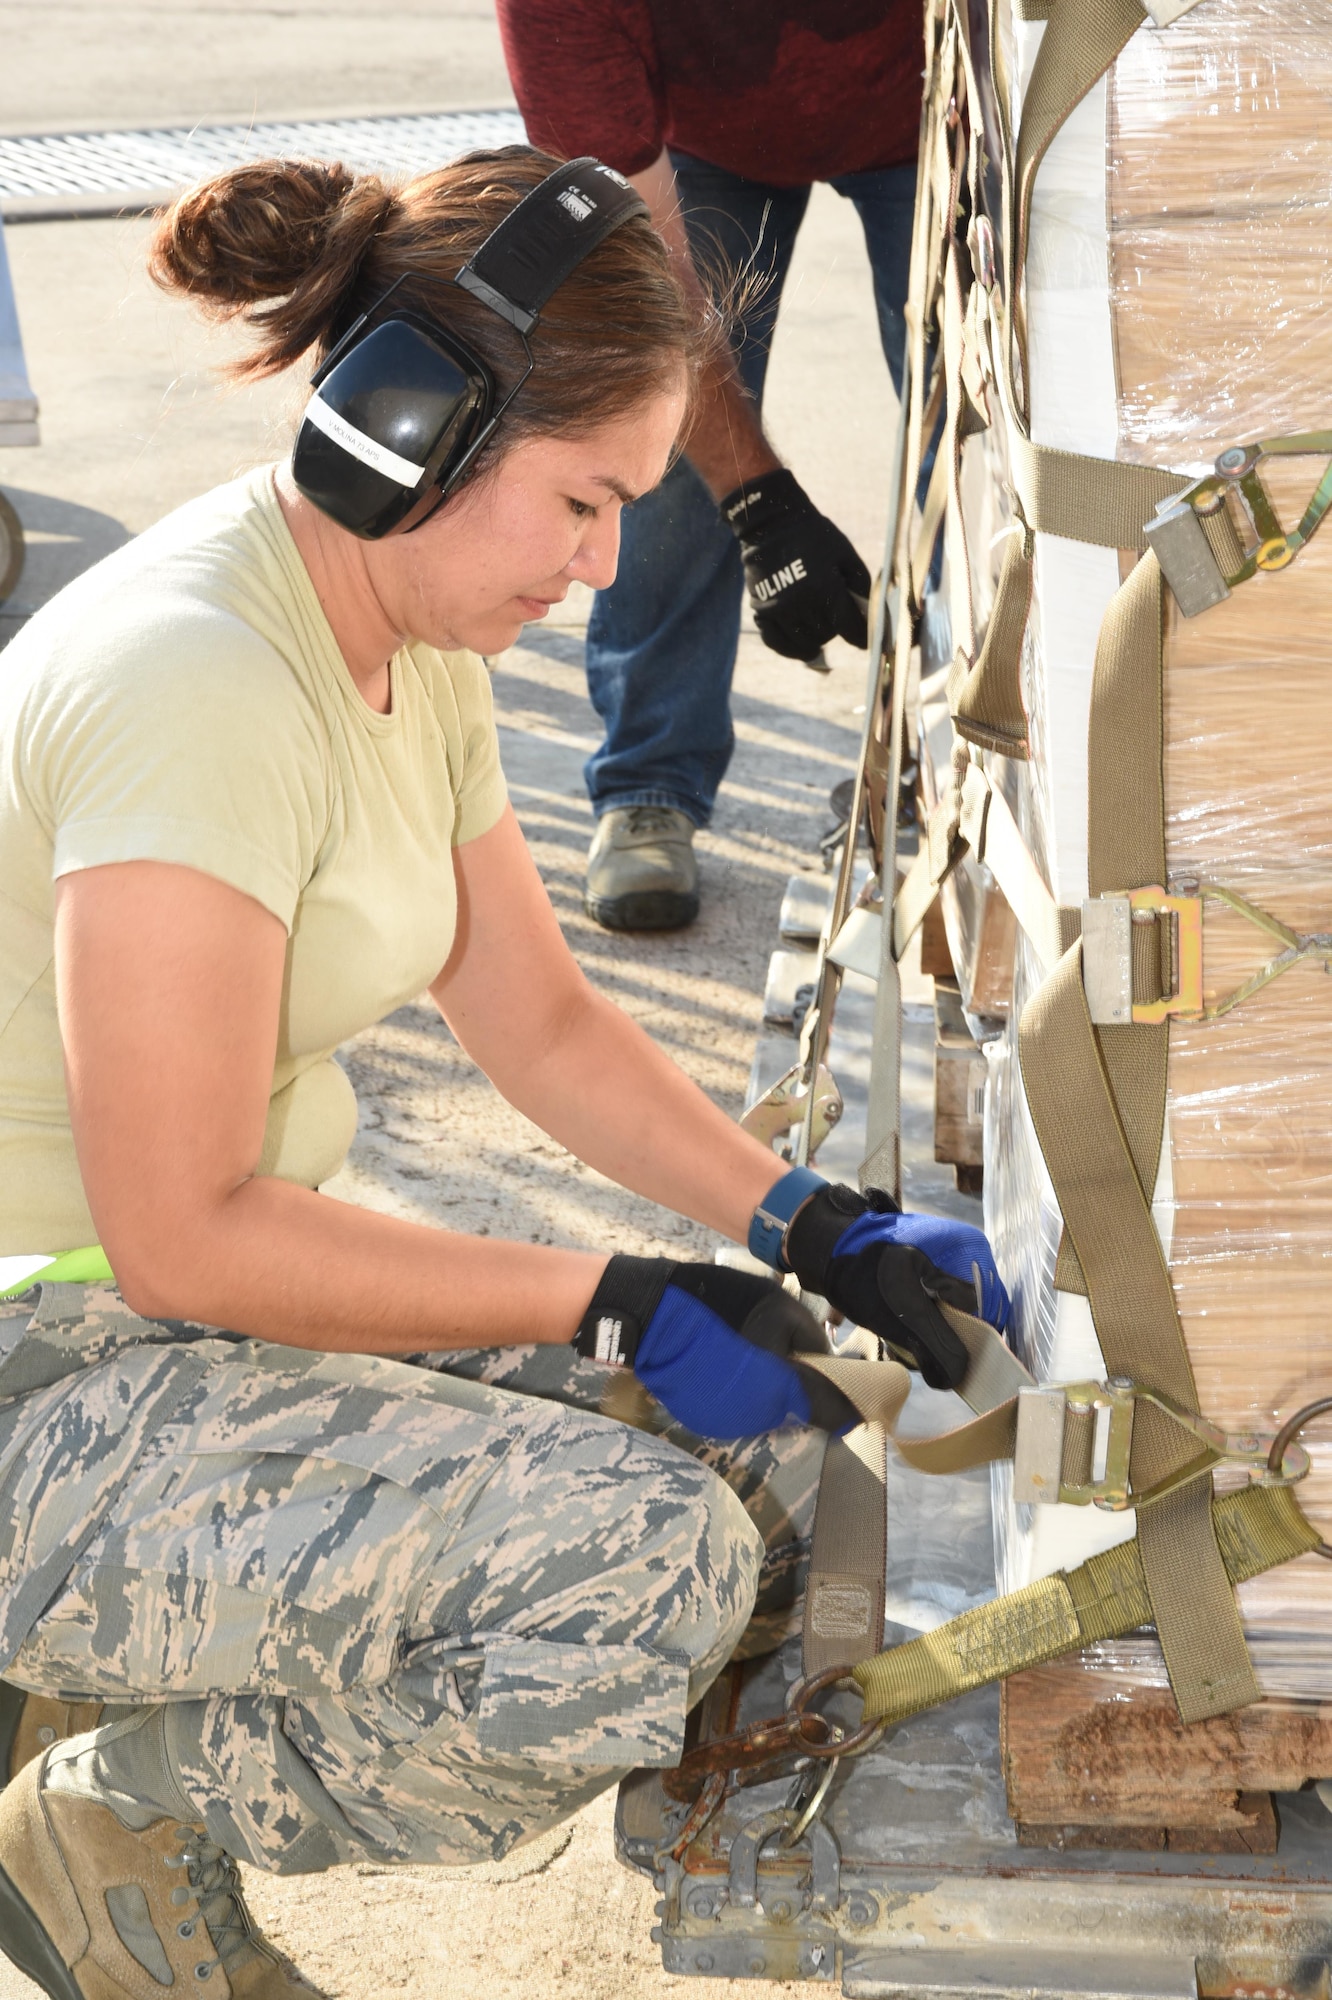 Air Force Master Sgt. Viviana Molina, 73rd Aerial Port Squadron air transportation, secures webbing straps on 90,000 lbs. of American Red Cross supplies August 29, 2017, at Naval Air Station Fort Worth Joint Reserve Base, Texas, in support of Hurricane Harvey relief efforts. Supplies included blankets and cots and were transported as part of the Defense Support of Civil Authority. Department of Defense provides medium and heavy lift rotary wing assets, along with ground transportation, to move personnel, commodities and equipment within Texas. (U.S. Air Force photo by Ms. Julie Briden-Garcia)